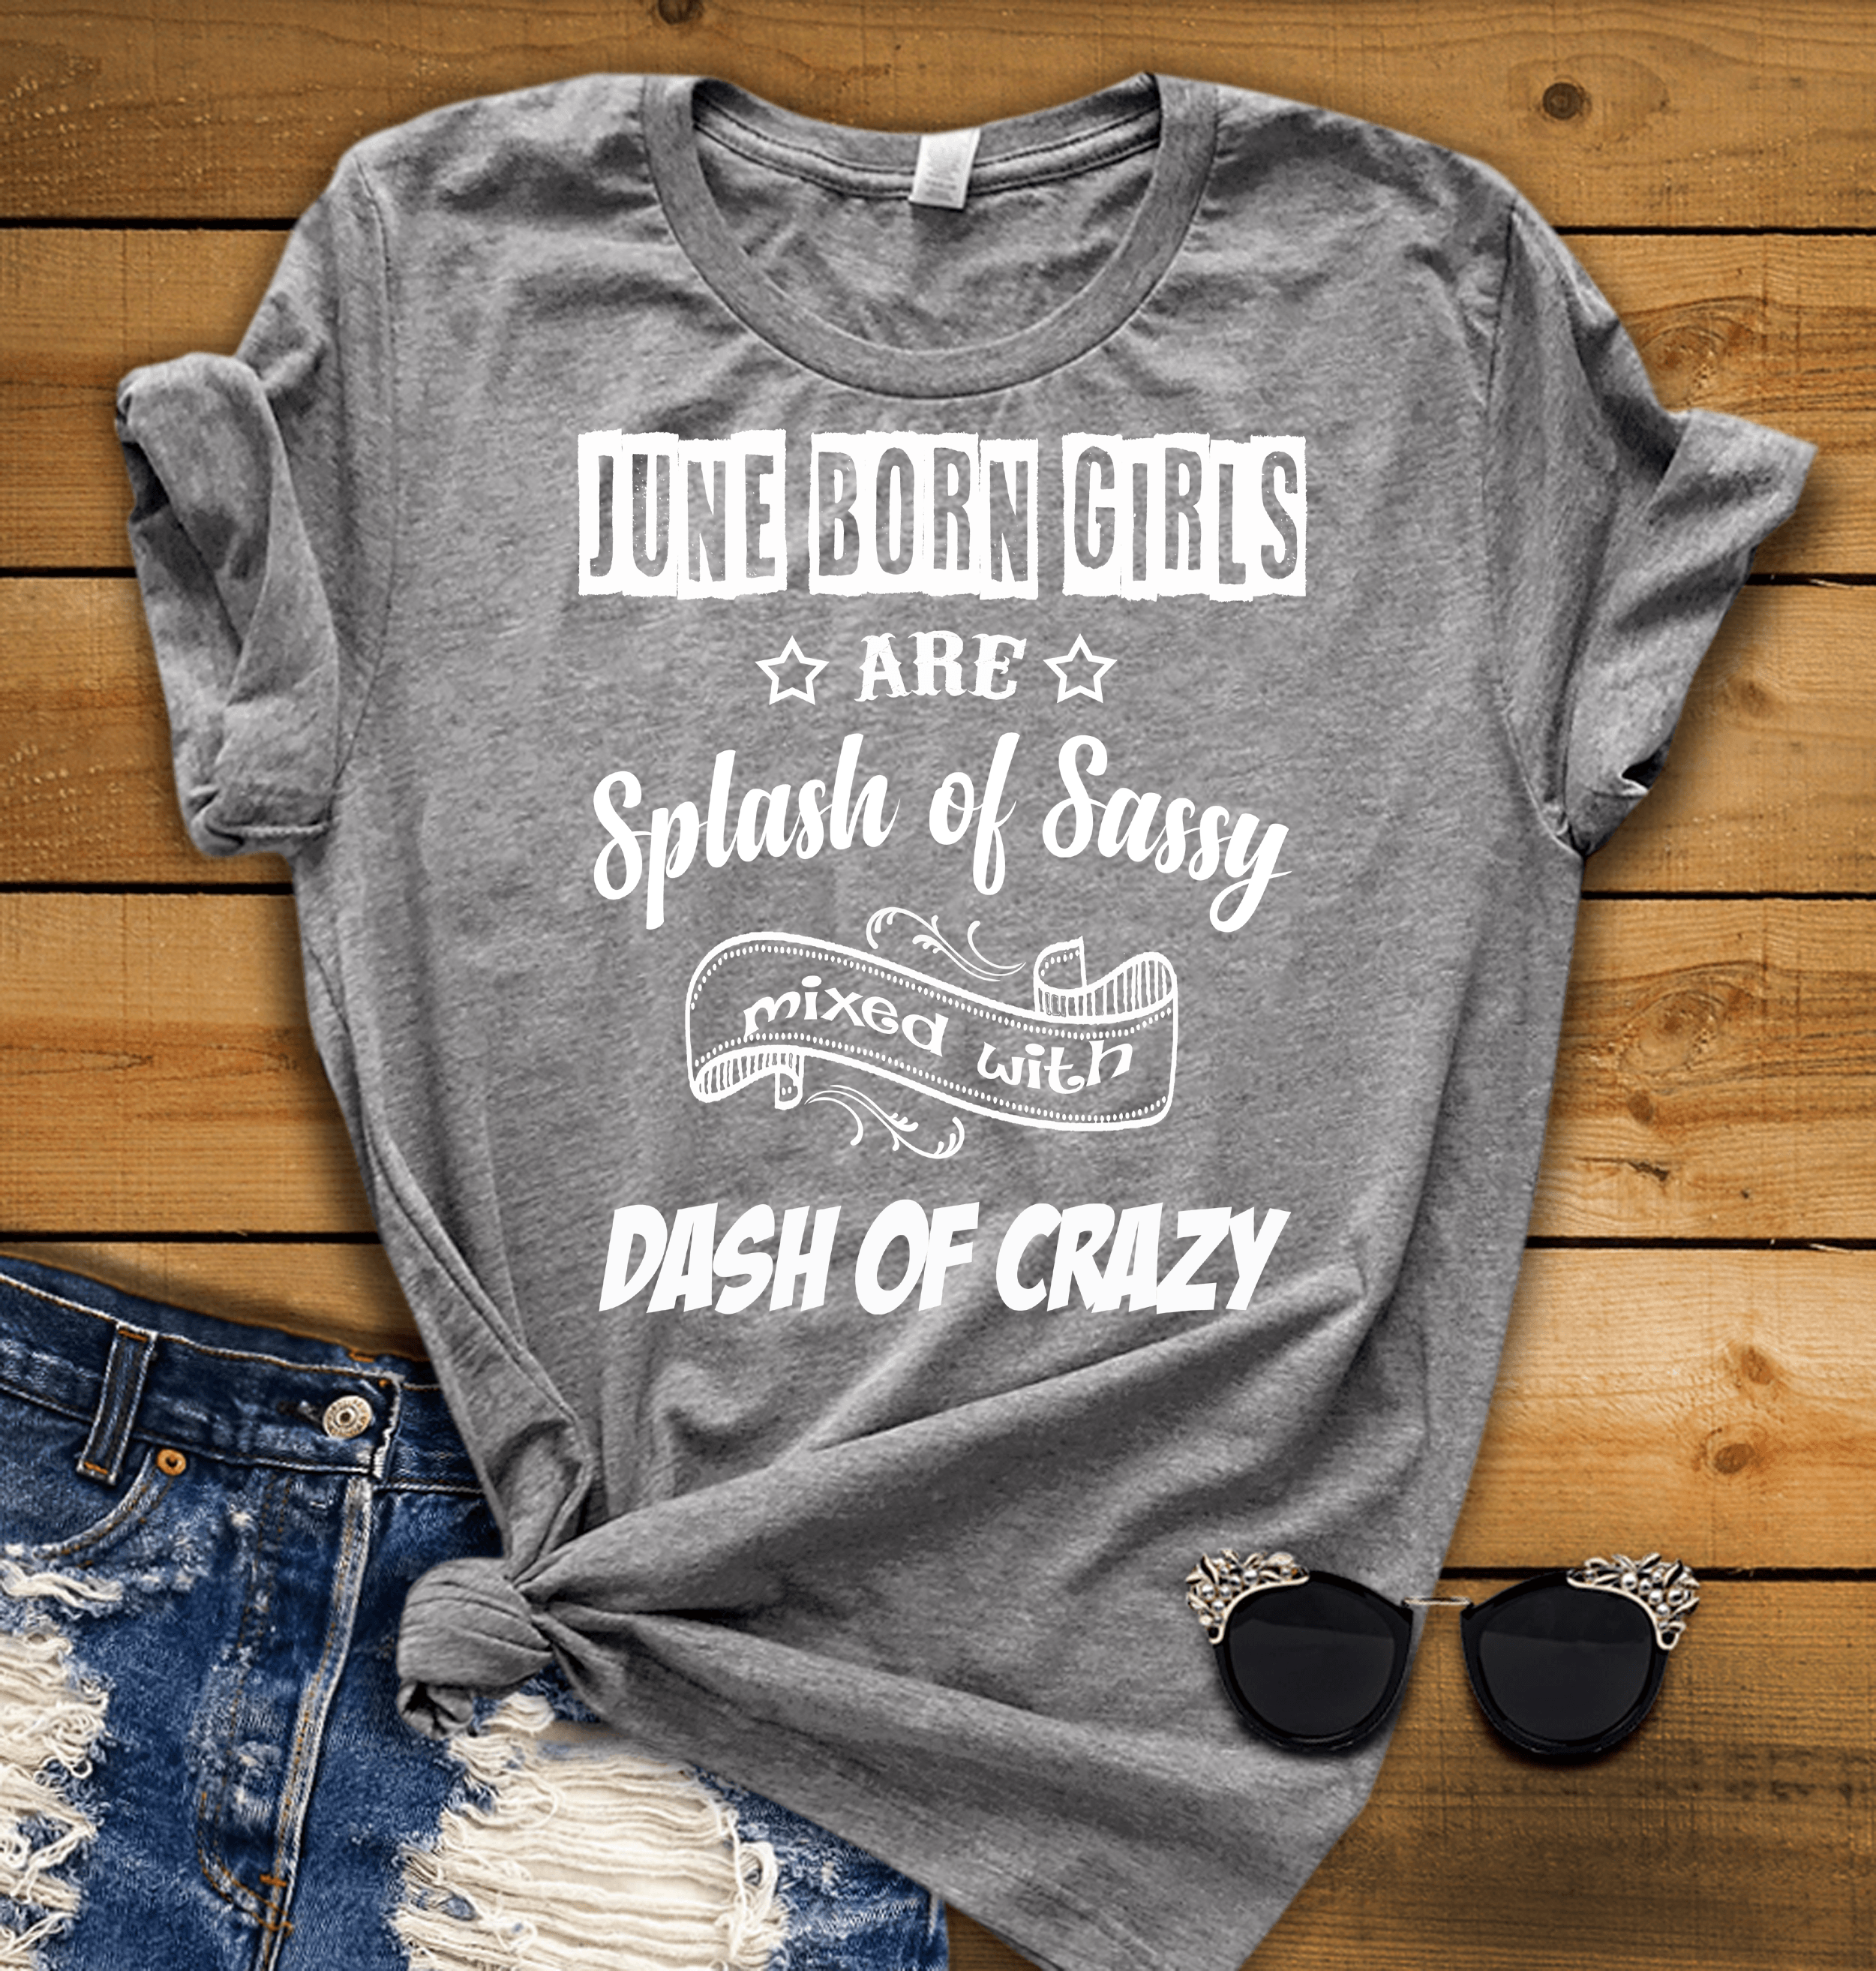 "Good Birthday Vibes For June Born Girls" Pack Of 6 Shirts